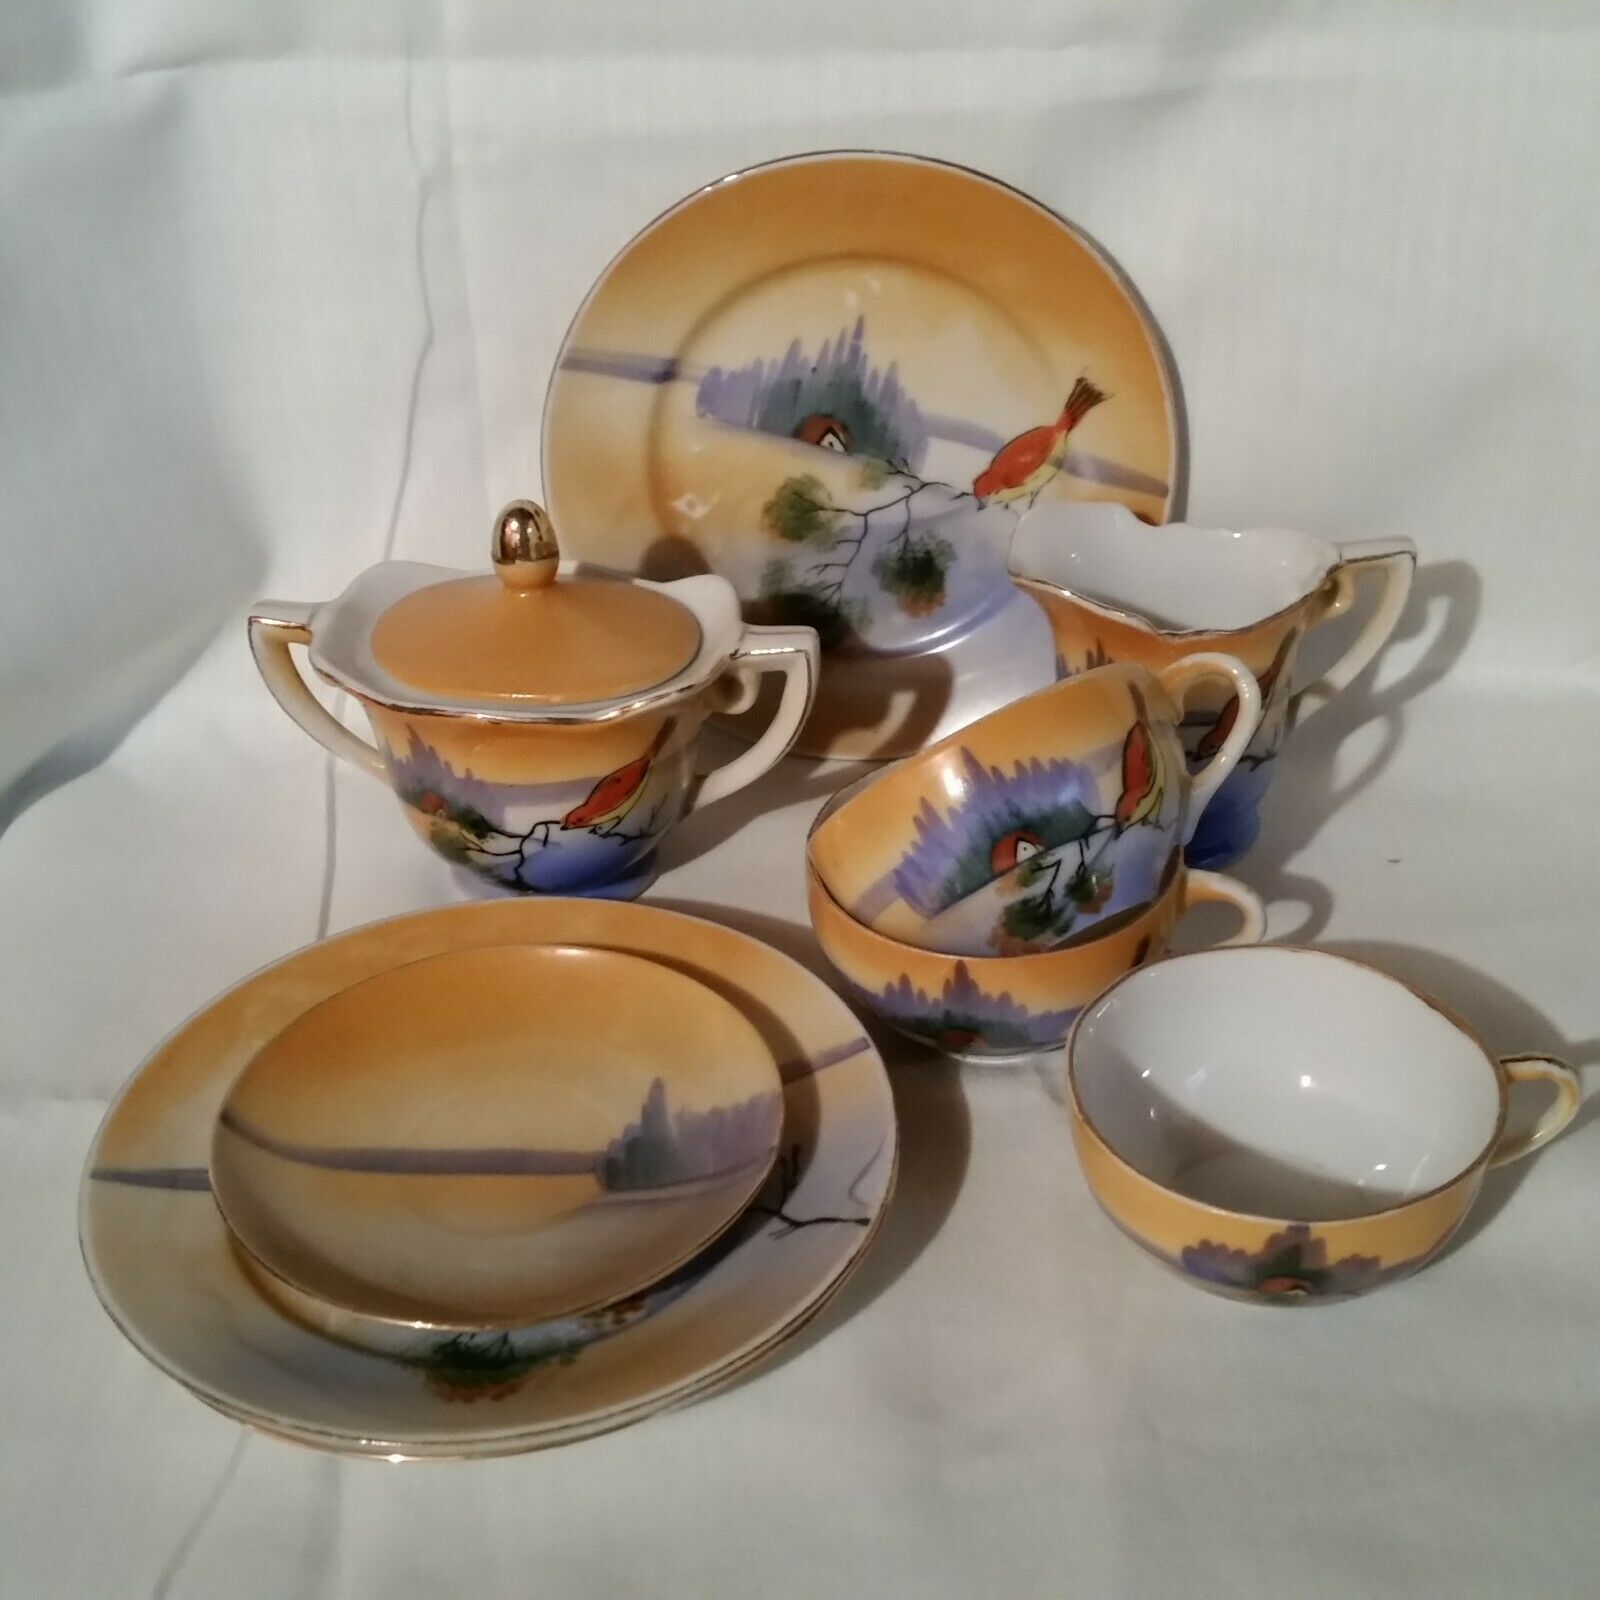 Vintage Childrens Dishes Bird On Branch By House On River Gold Trim 9 Pcs Japan